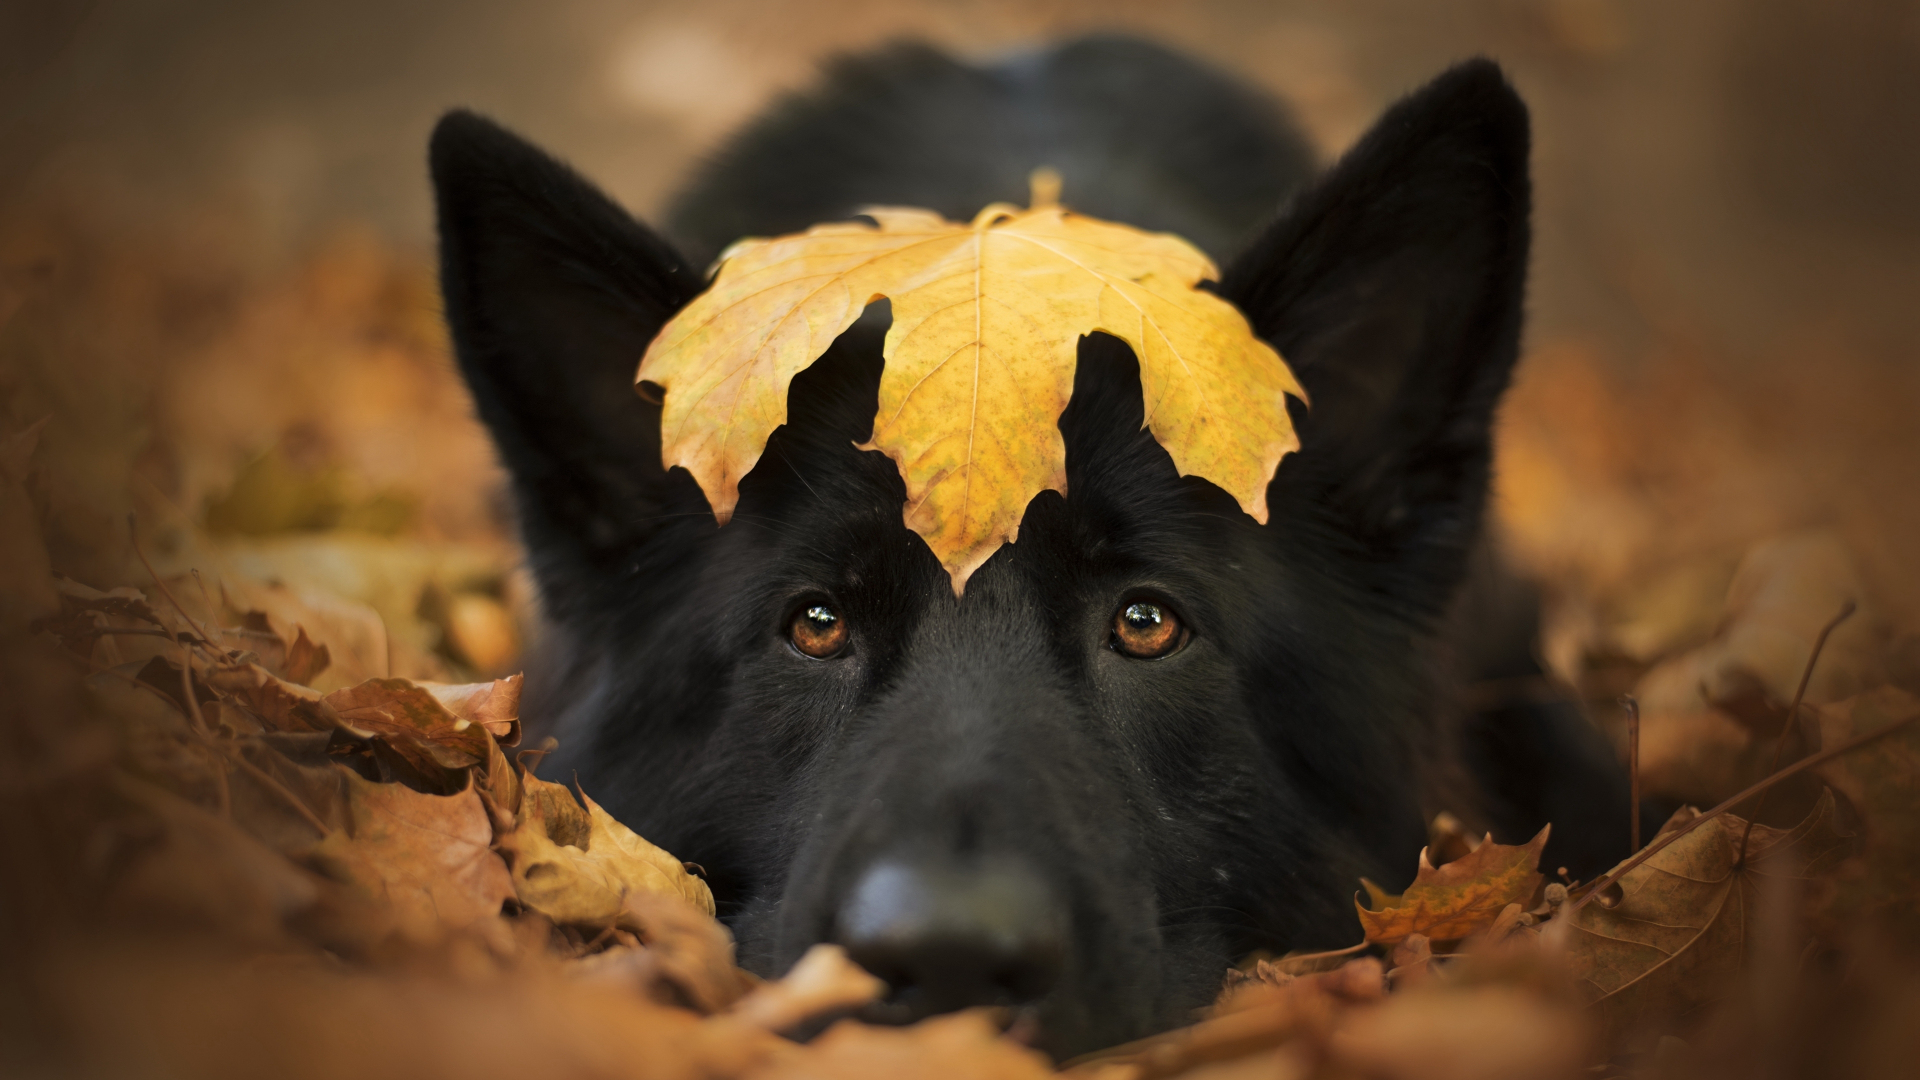 Dog and autumn, cute stare, close up, 1920x1080 wallpaper